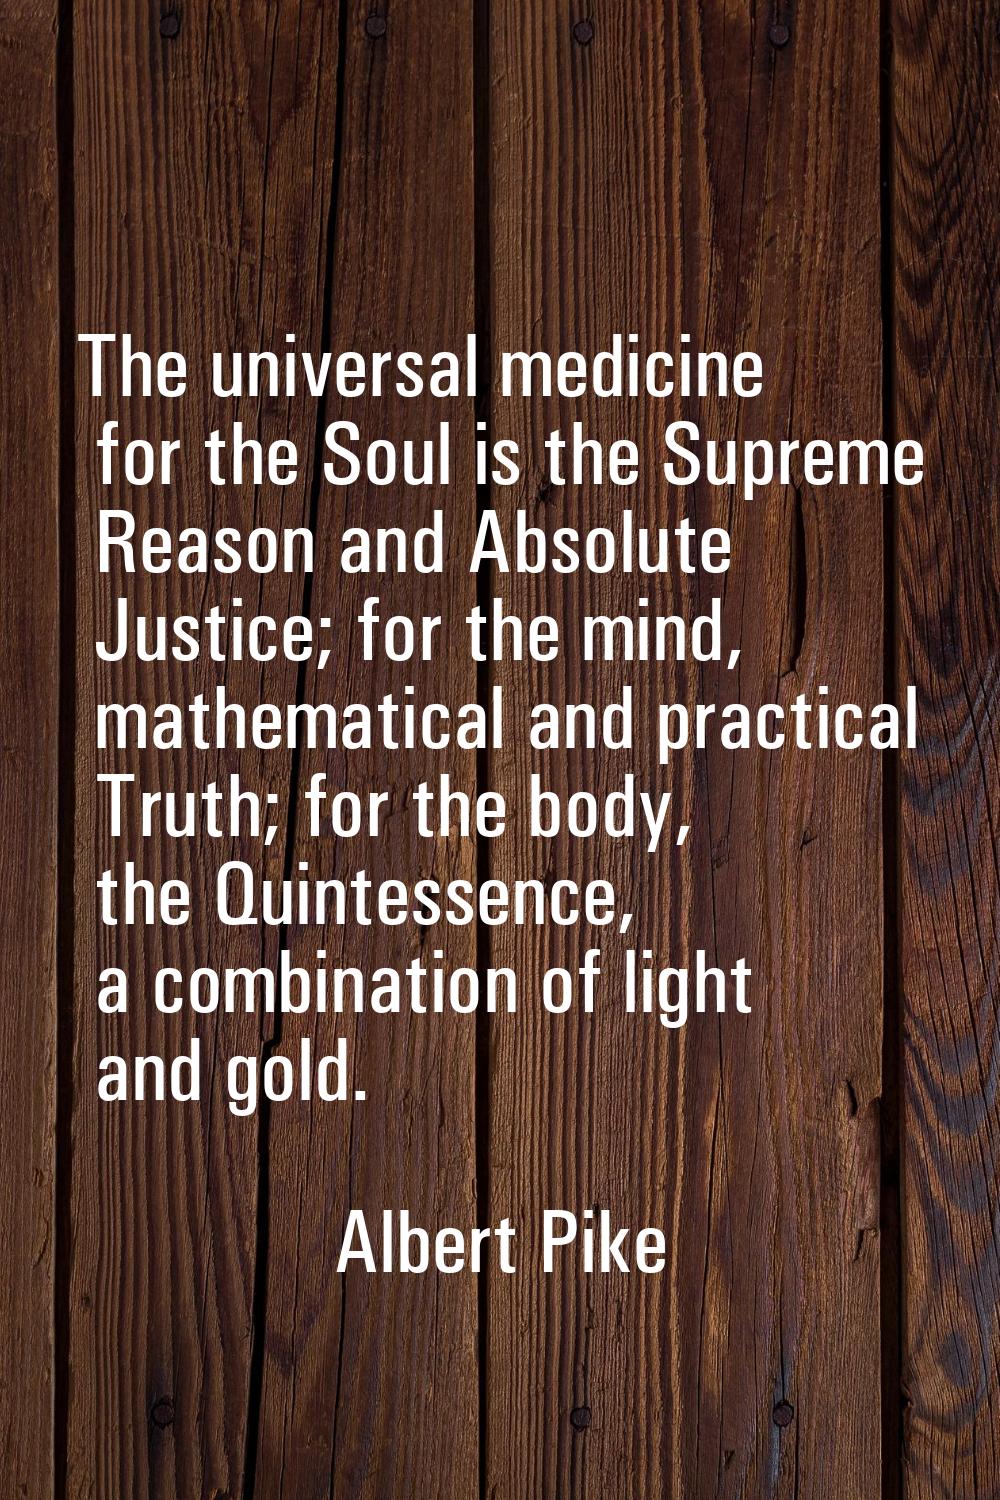 The universal medicine for the Soul is the Supreme Reason and Absolute Justice; for the mind, mathe